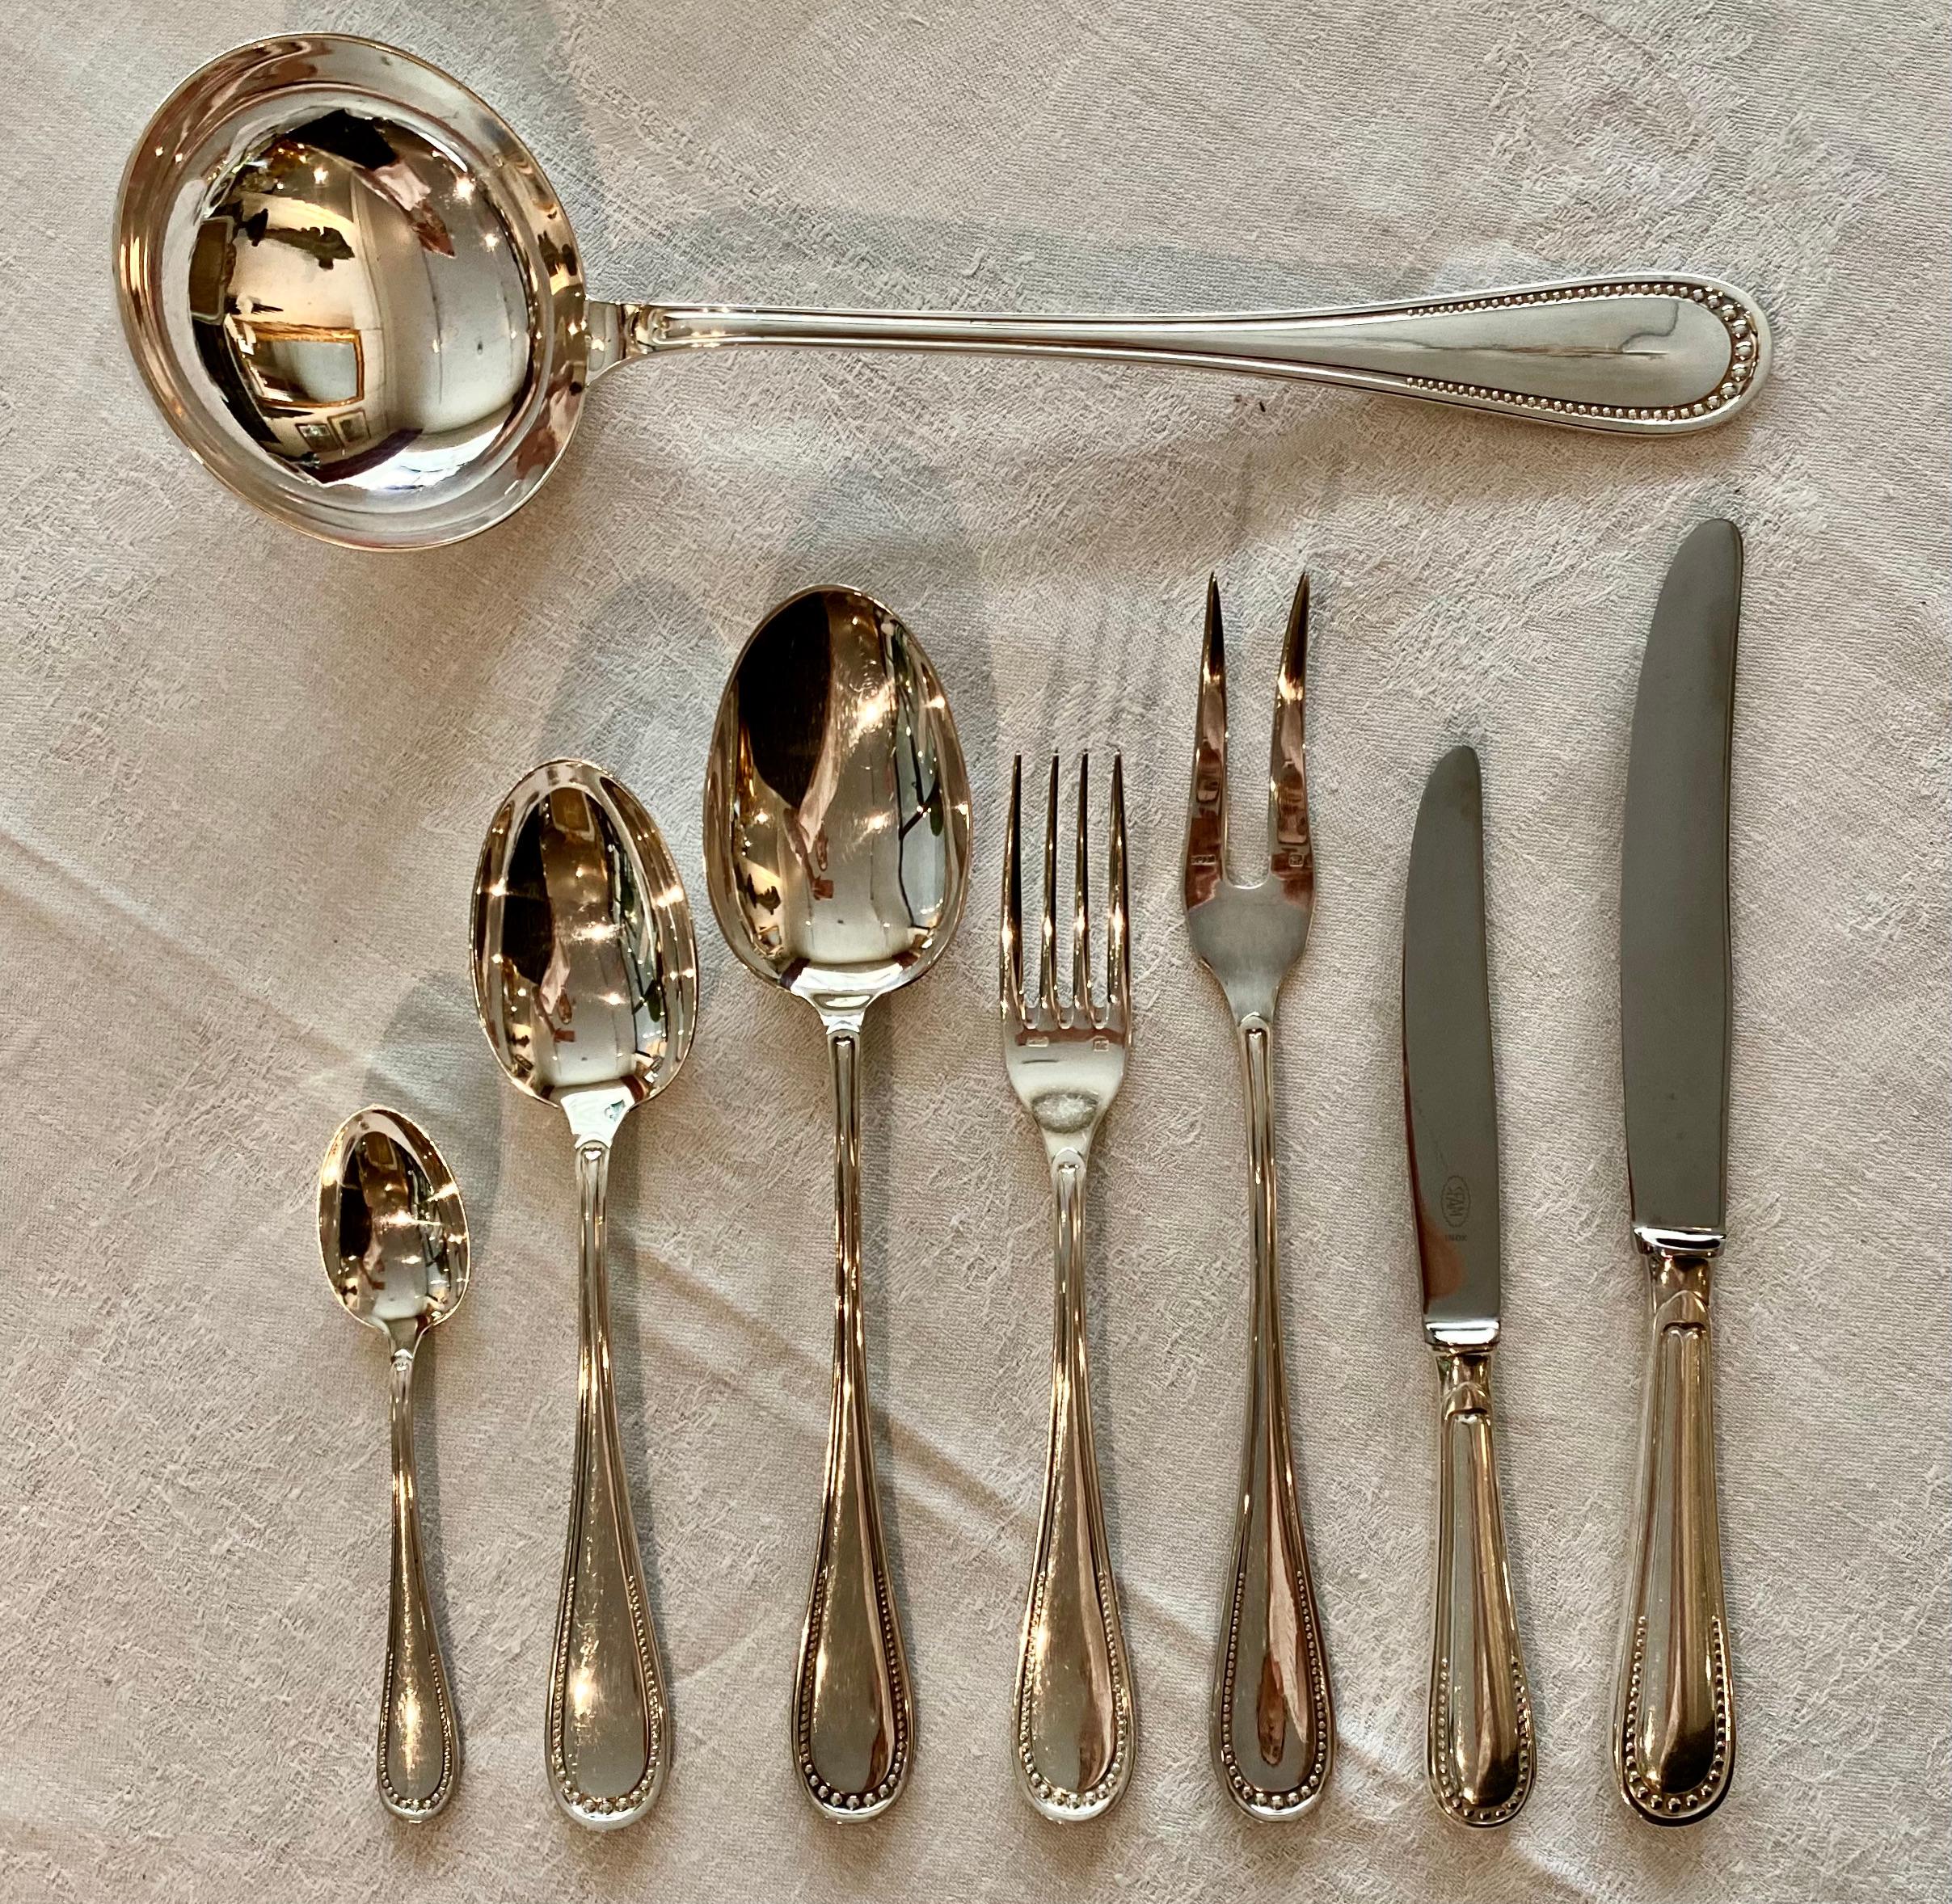 French silver plate cutlery set by Guêpe Fils Lyon, Louis XVI style
Guêpe Fils Silversmith and Master Cutler, established in Lyon in 1847. 
The 